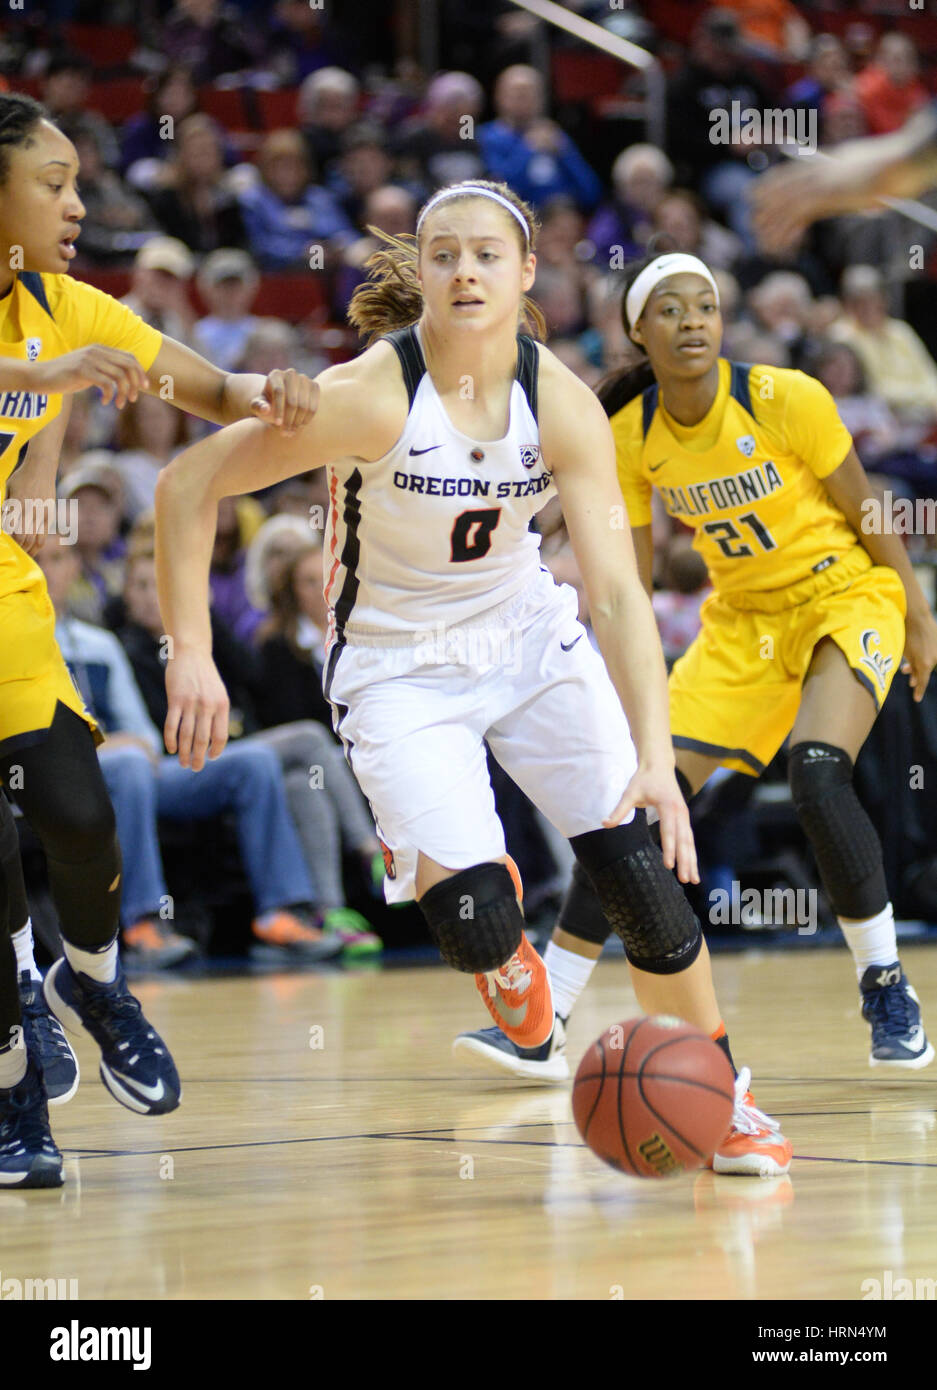 Seattle, WA, USA. 3rd Mar, 2017. OSU's Mikayla Pivec (0) dribbles down the lane against Cal's Jaelyn Brown (33) during a PAC12 women's tournament game between the Oregon State Beavers and the Cal Bears. OSU won the game 65-49. The game was played at Key Arena in Seattle, WA. Jeff Halstead/CSM/Alamy Live News Stock Photo